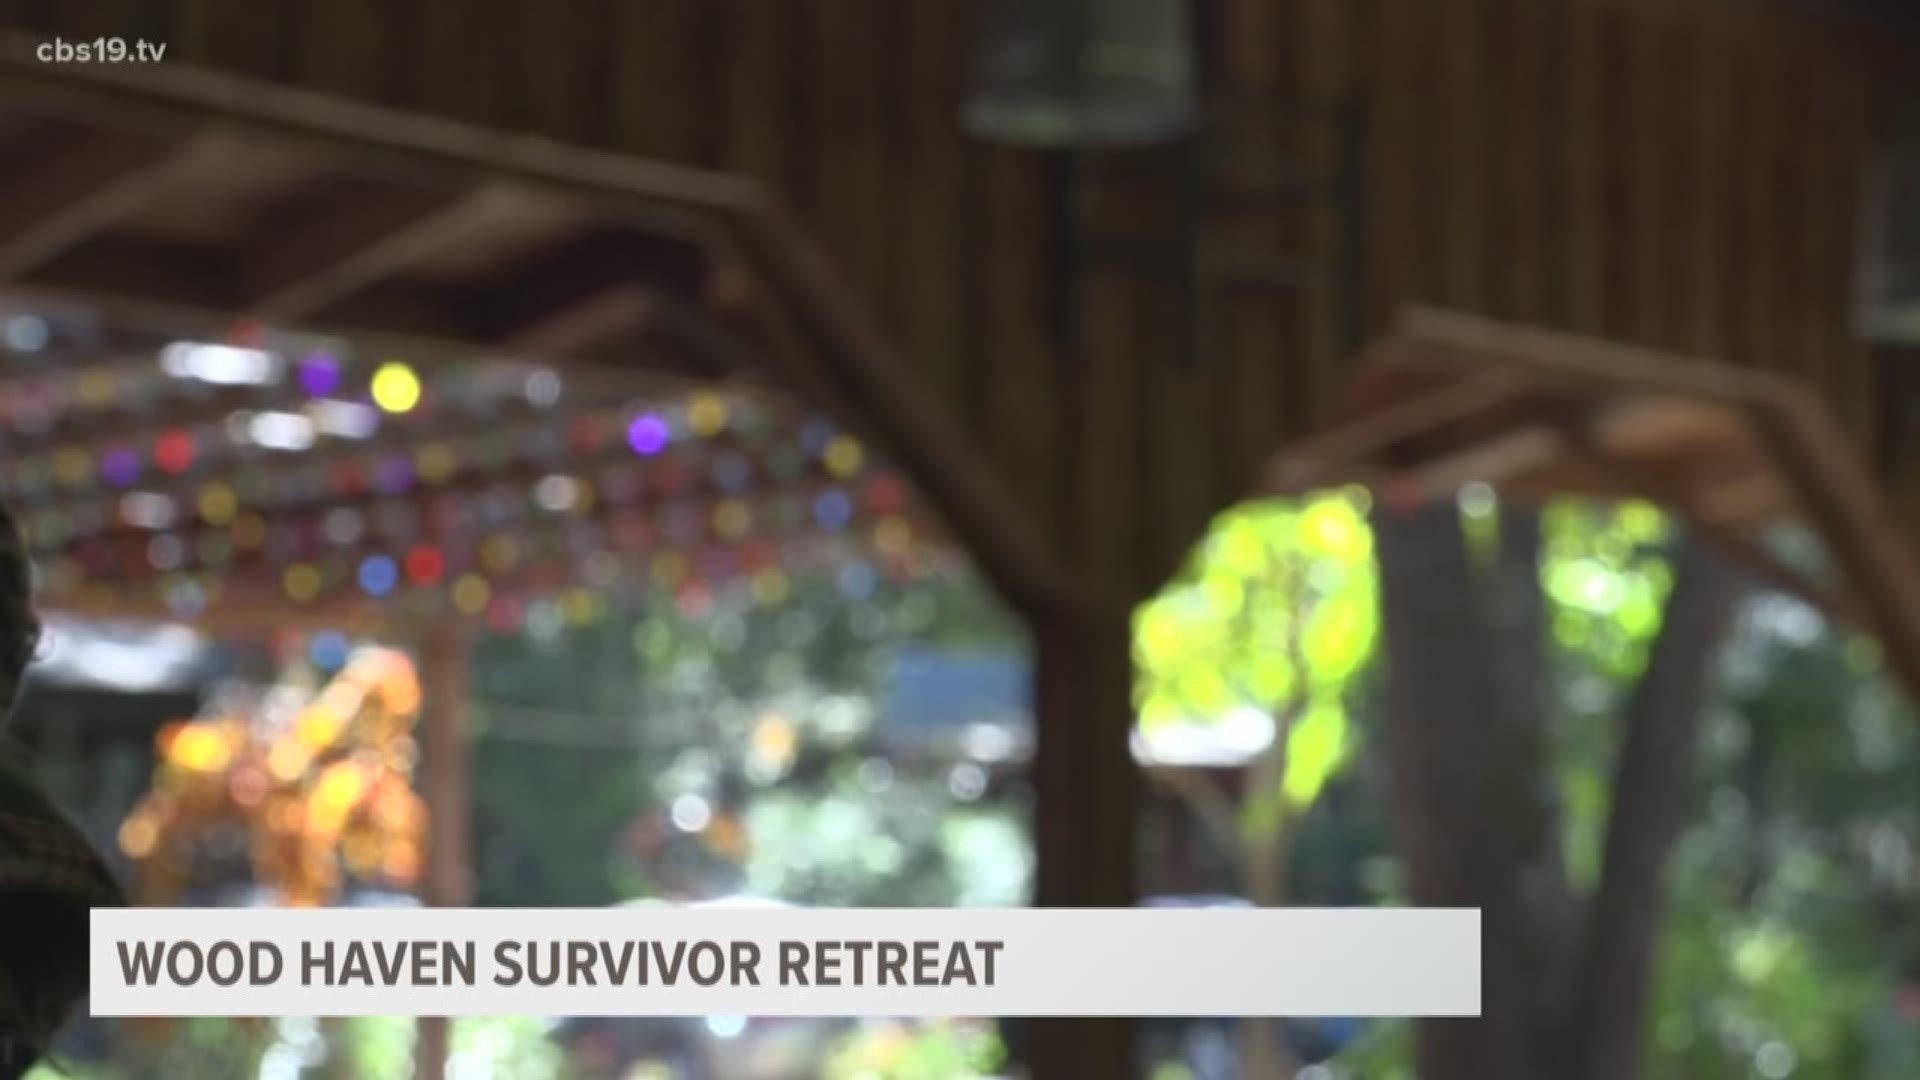 Women from across East Texas gathered to celebrate survival.